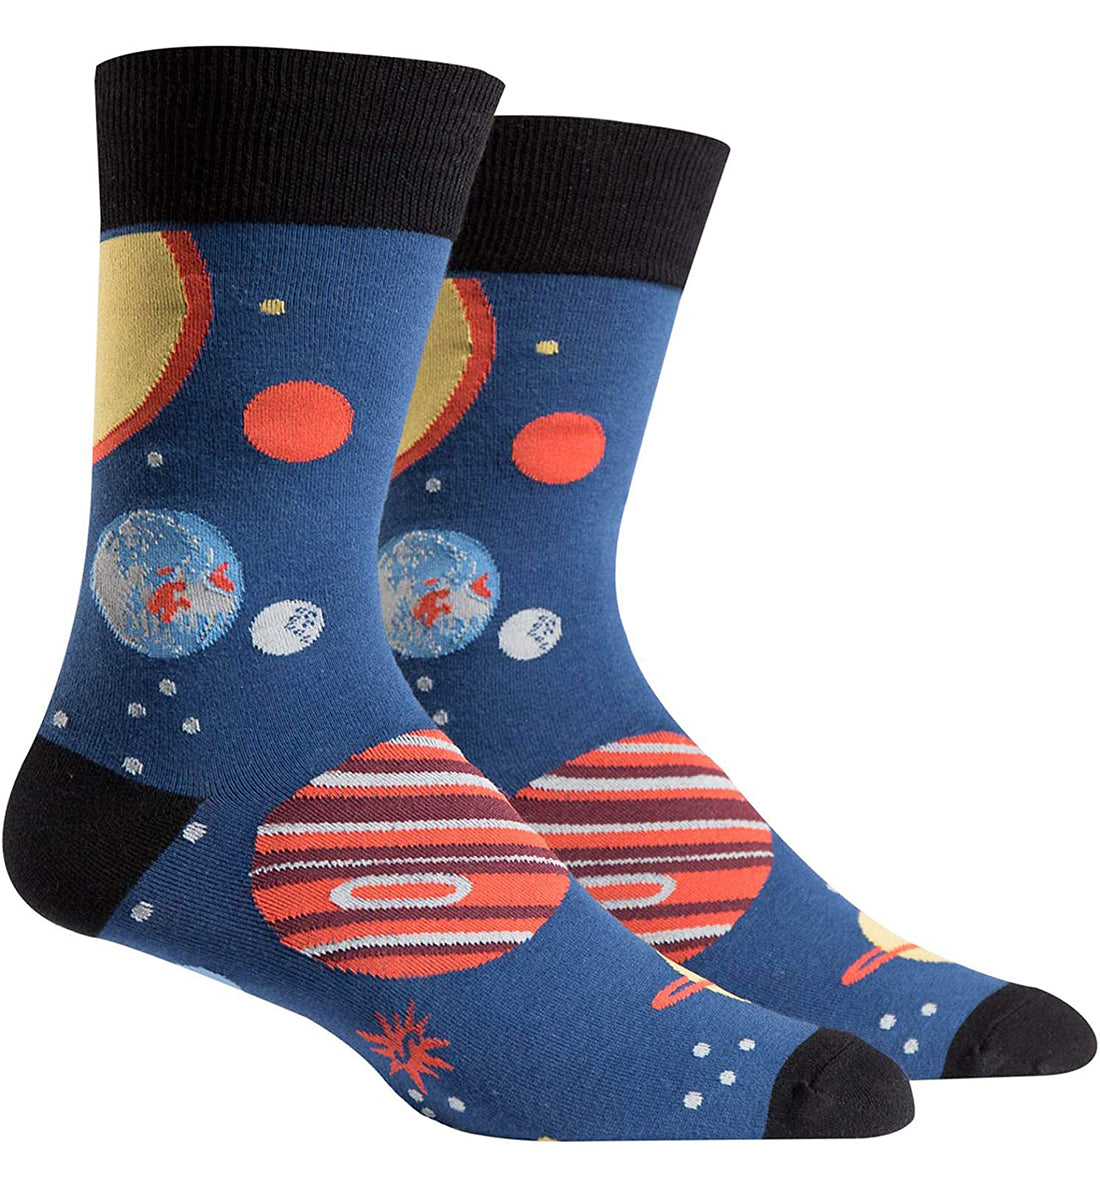 SOCK it to me Men's Crew Socks (mef0136),Planets - Planets,One Size